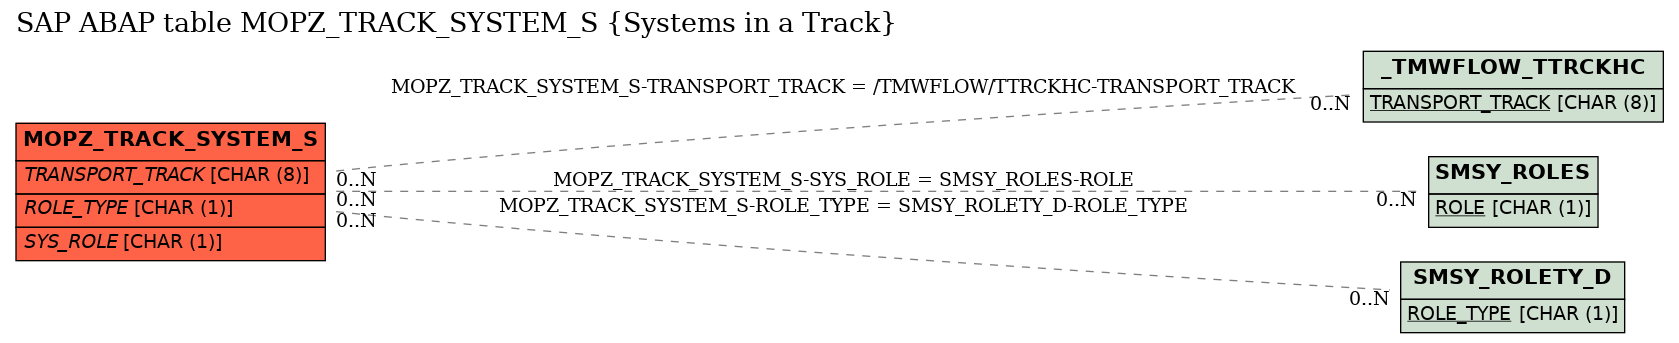 E-R Diagram for table MOPZ_TRACK_SYSTEM_S (Systems in a Track)